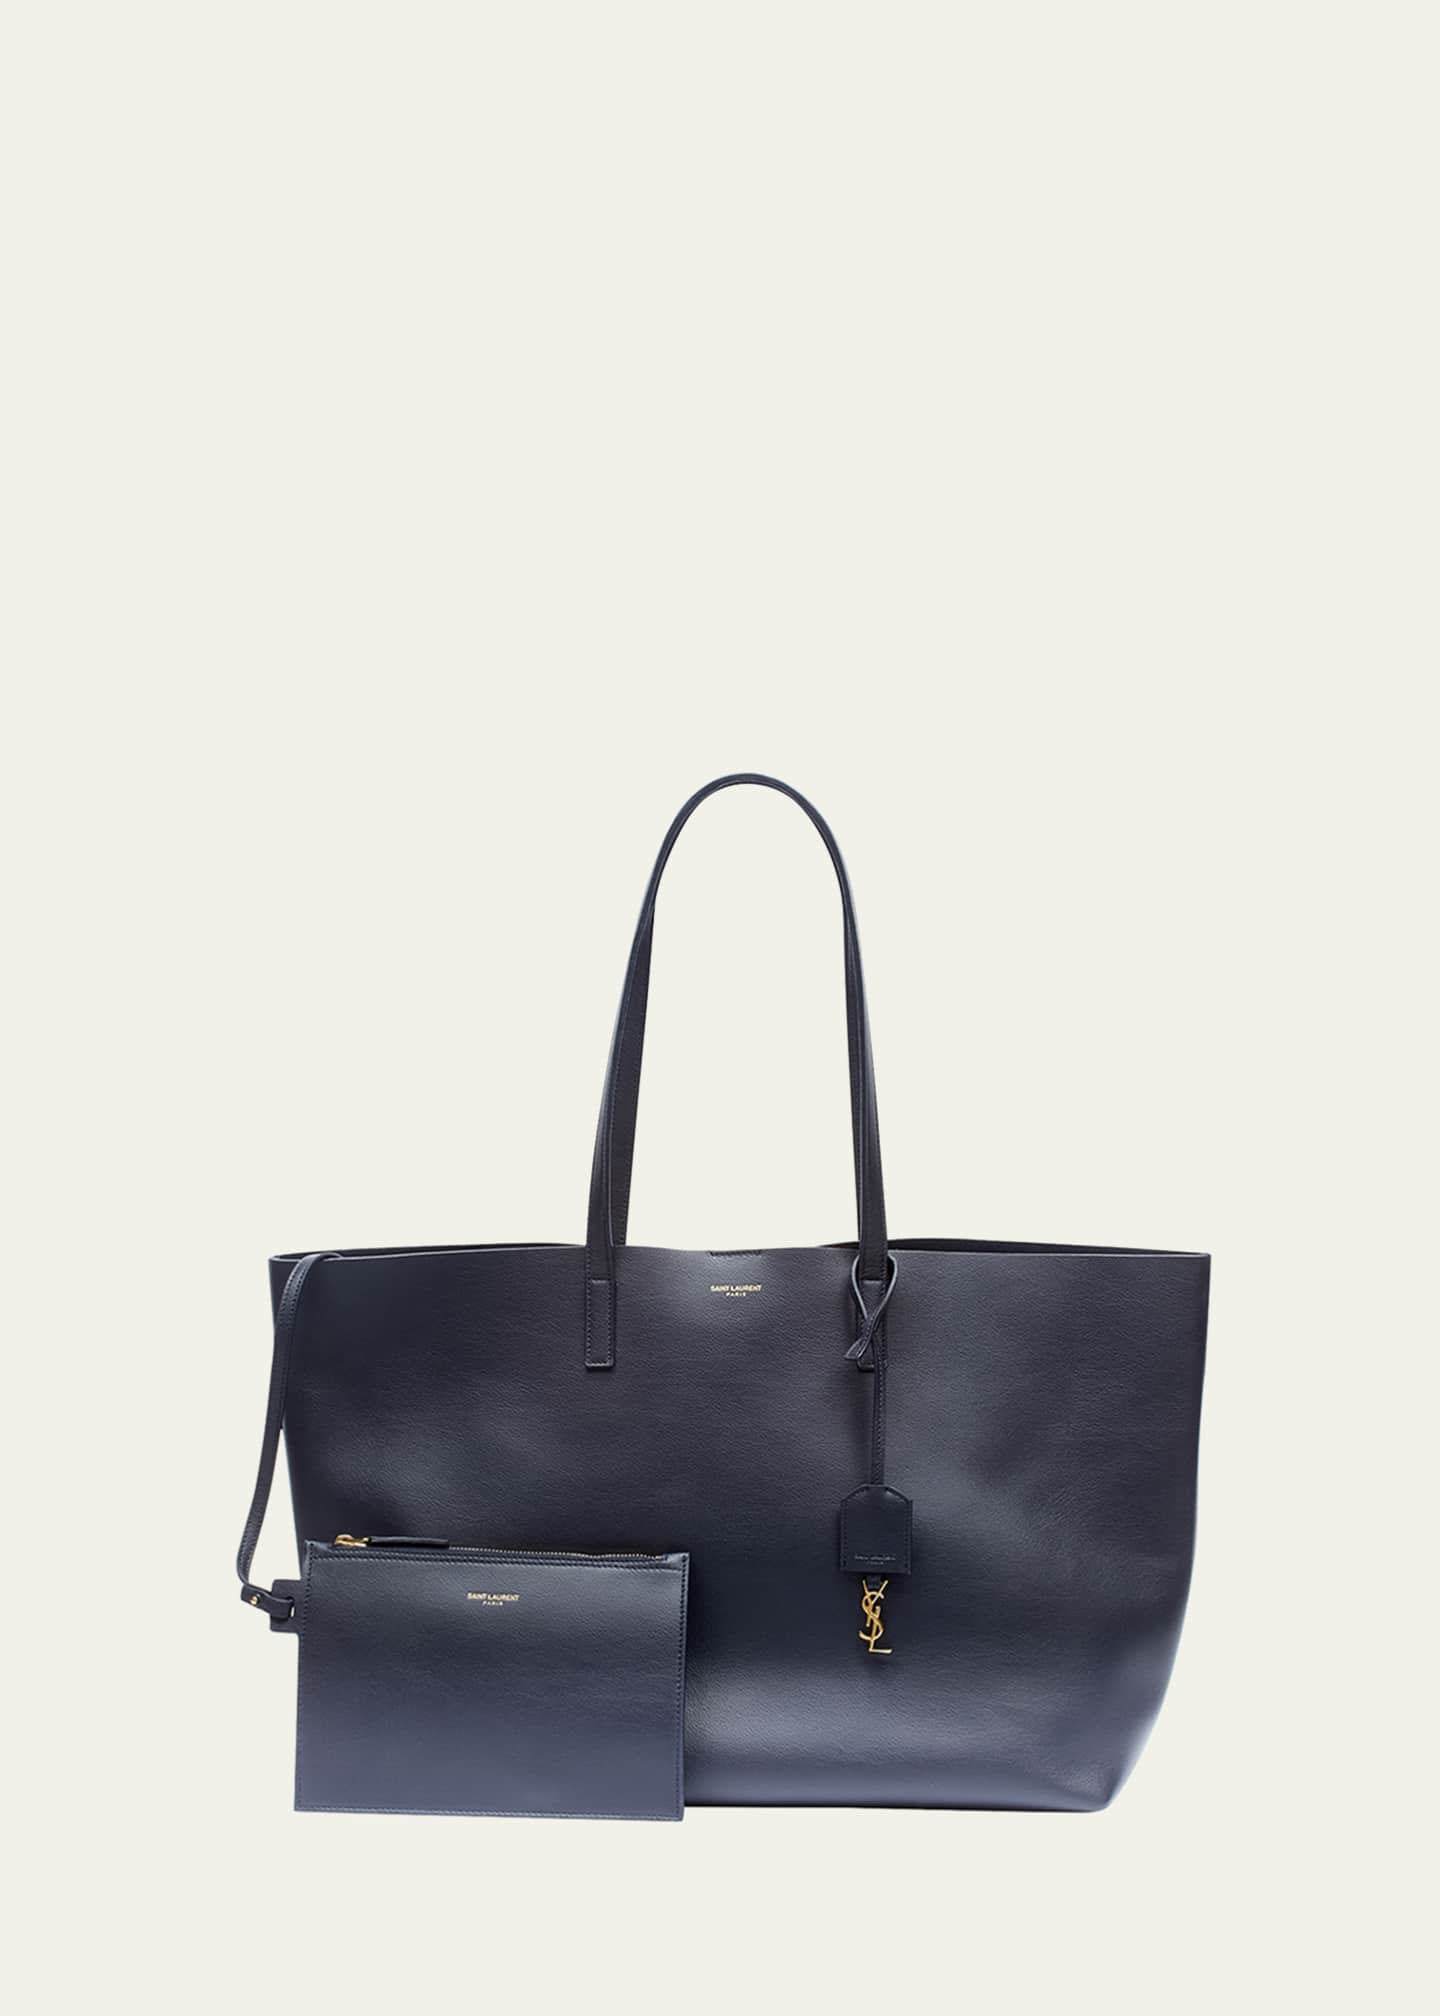 East West Calfskin Shopping Tote Bag